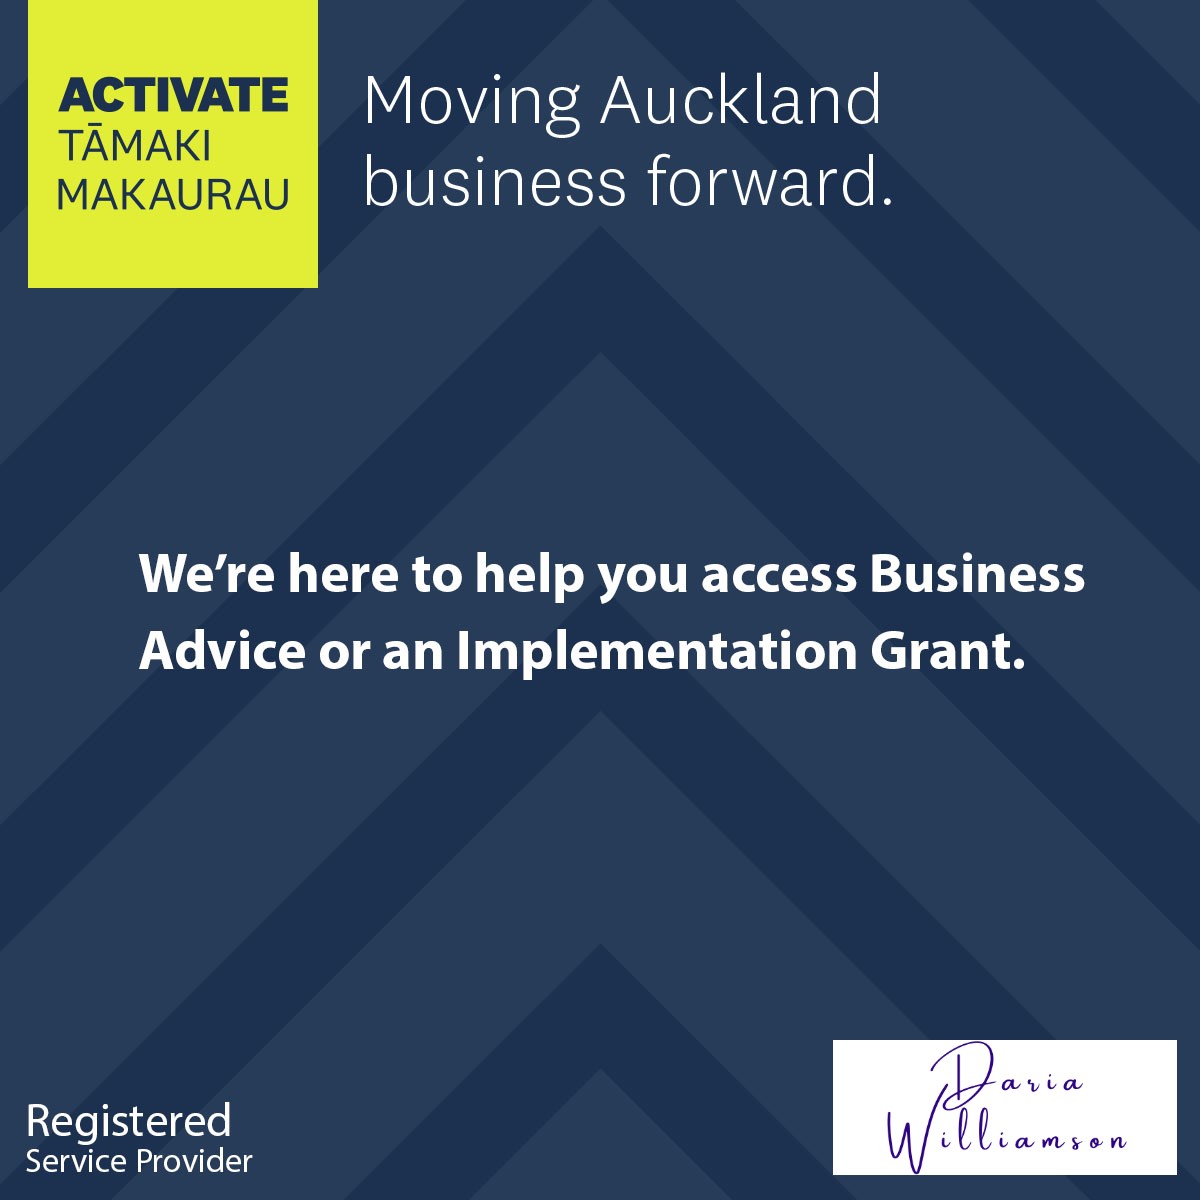 A blue background with text boxes "Activate Tāmaki Makaurau", "Moving Auckland business forward", "We're here to help you access Business Advice or an Implementation Grant", "Registered Service Provider" and Daria Williamson logo